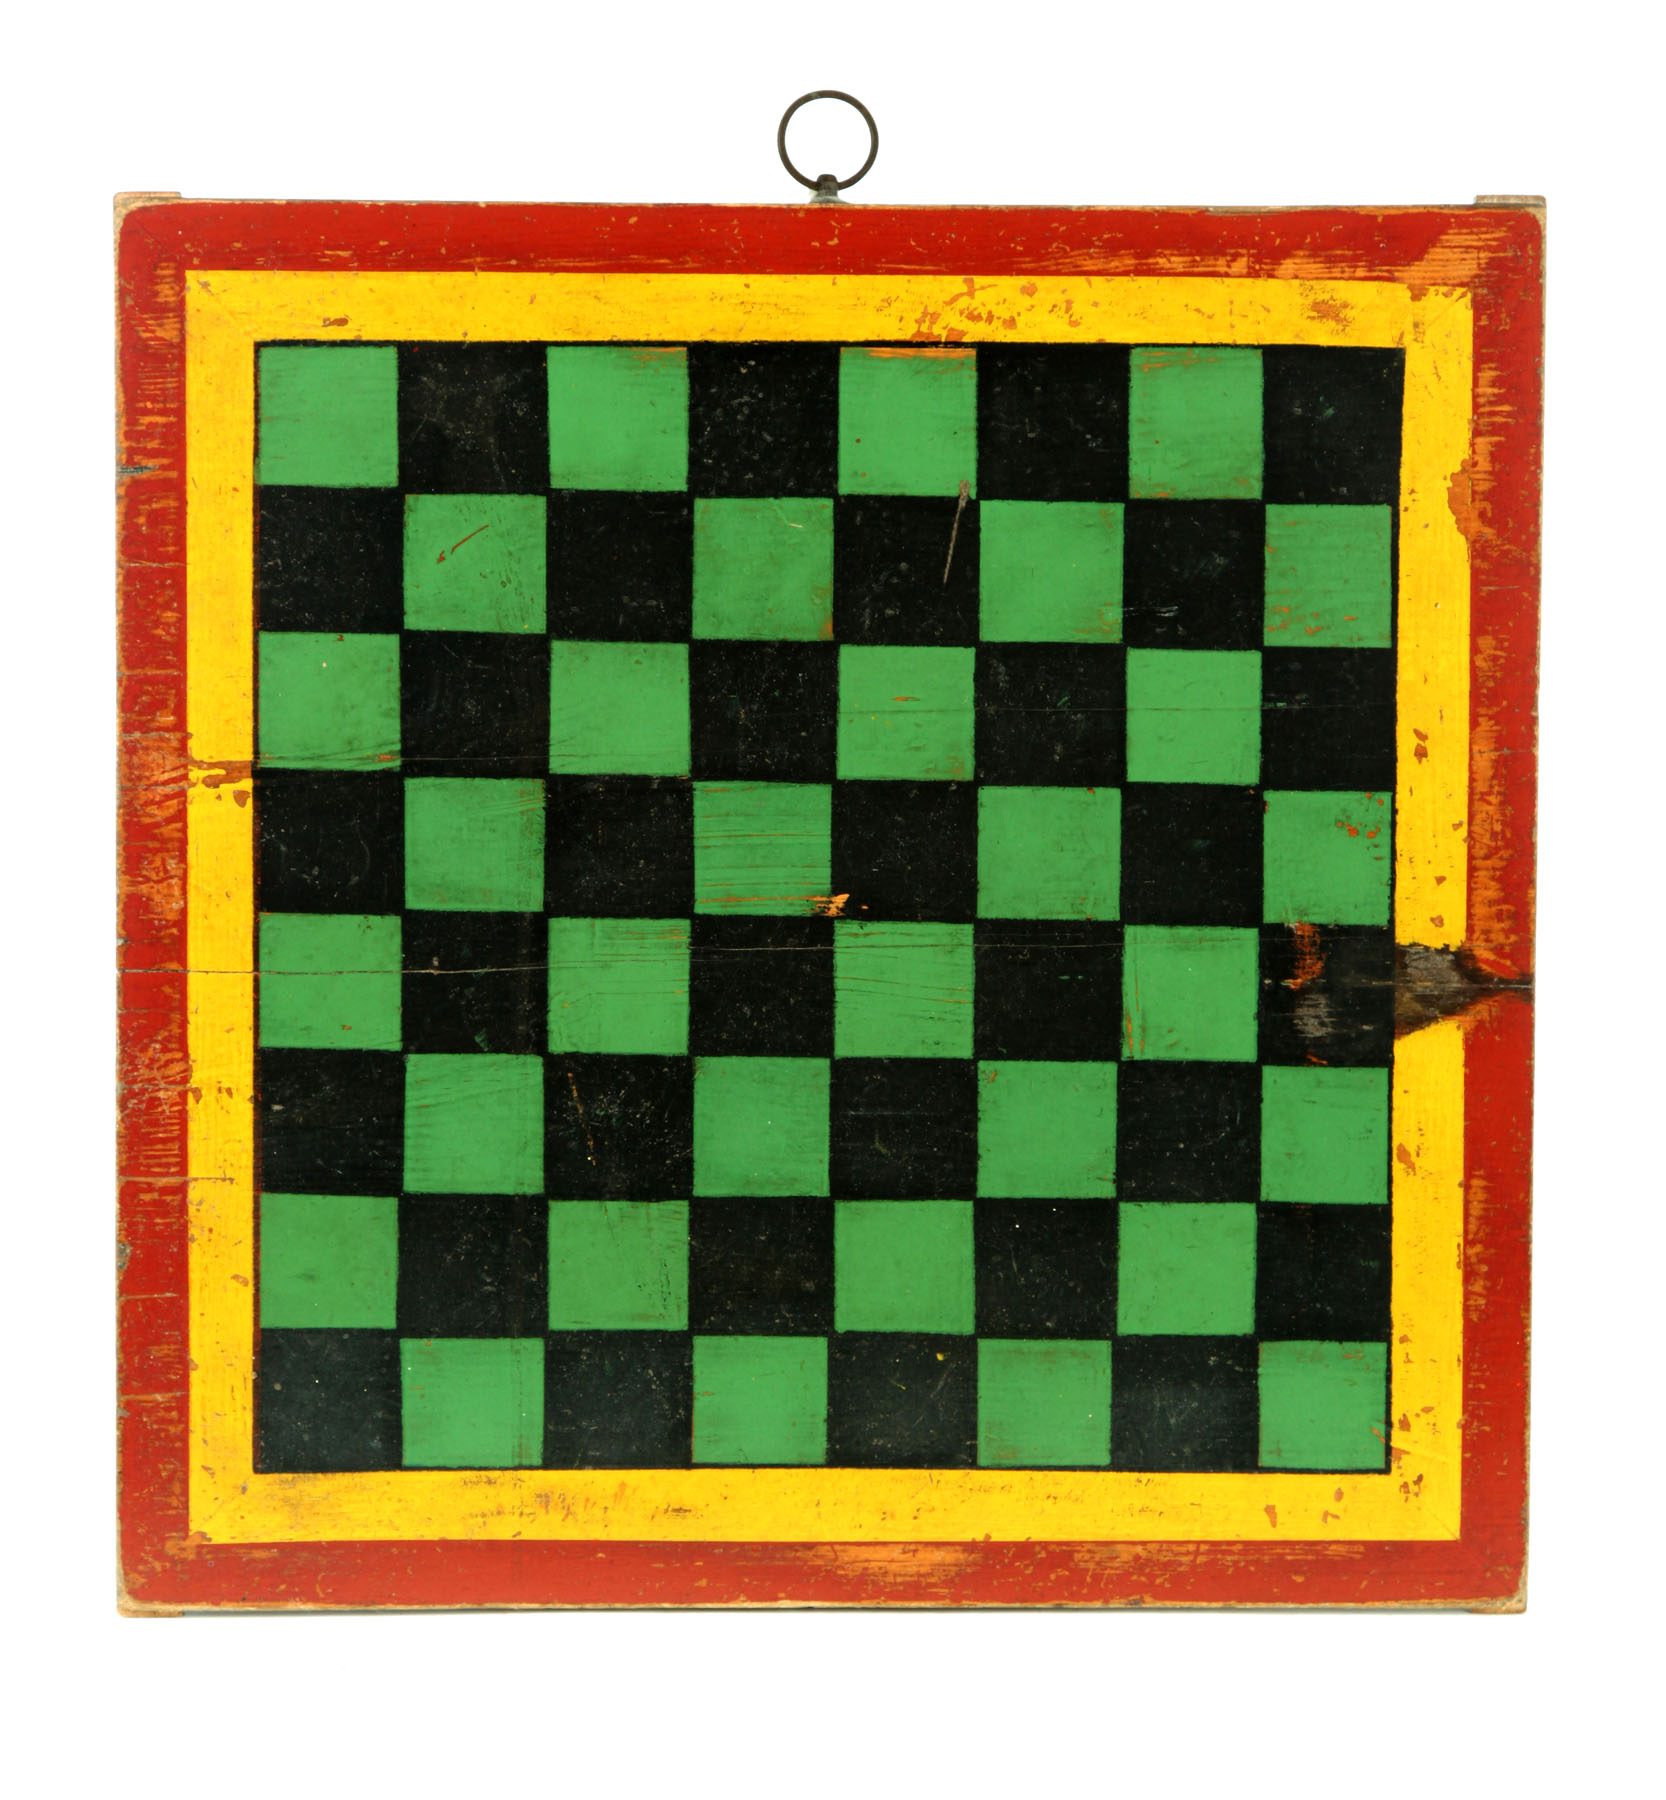 DECORATED GAMEBOARD.  American